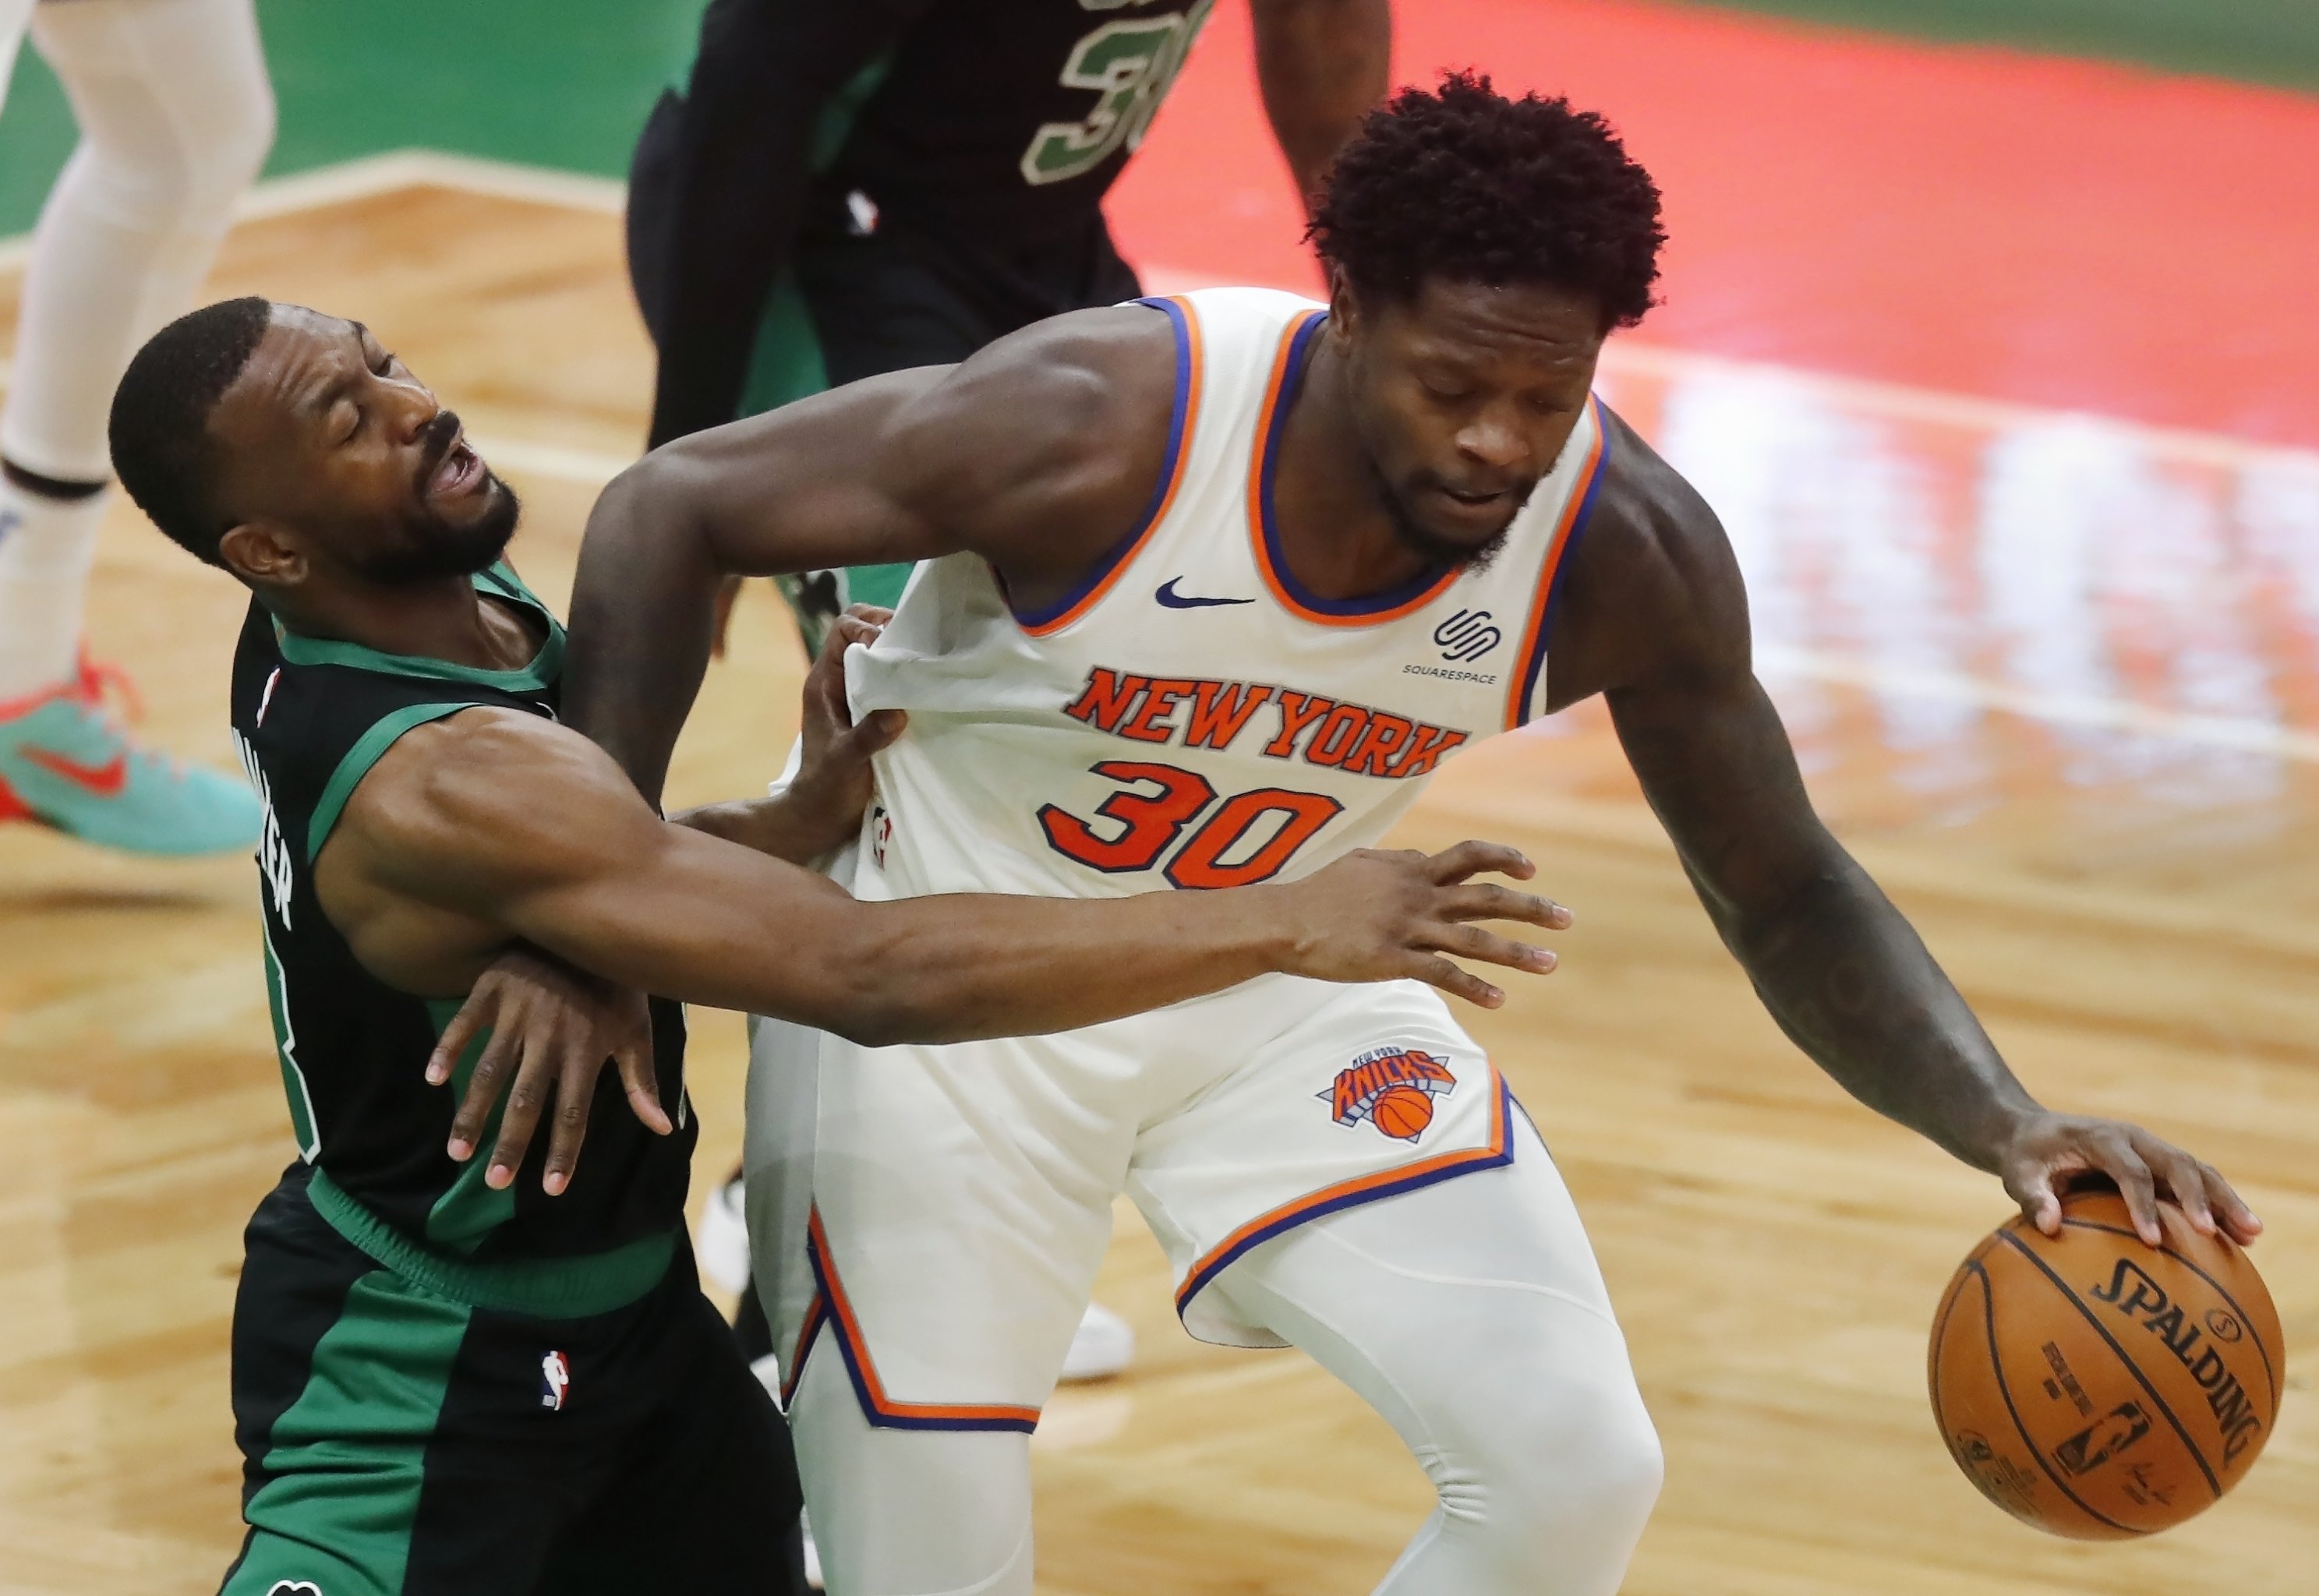 Kemba Walker was 'pretty close' to joining Knicks in 2019, teaming